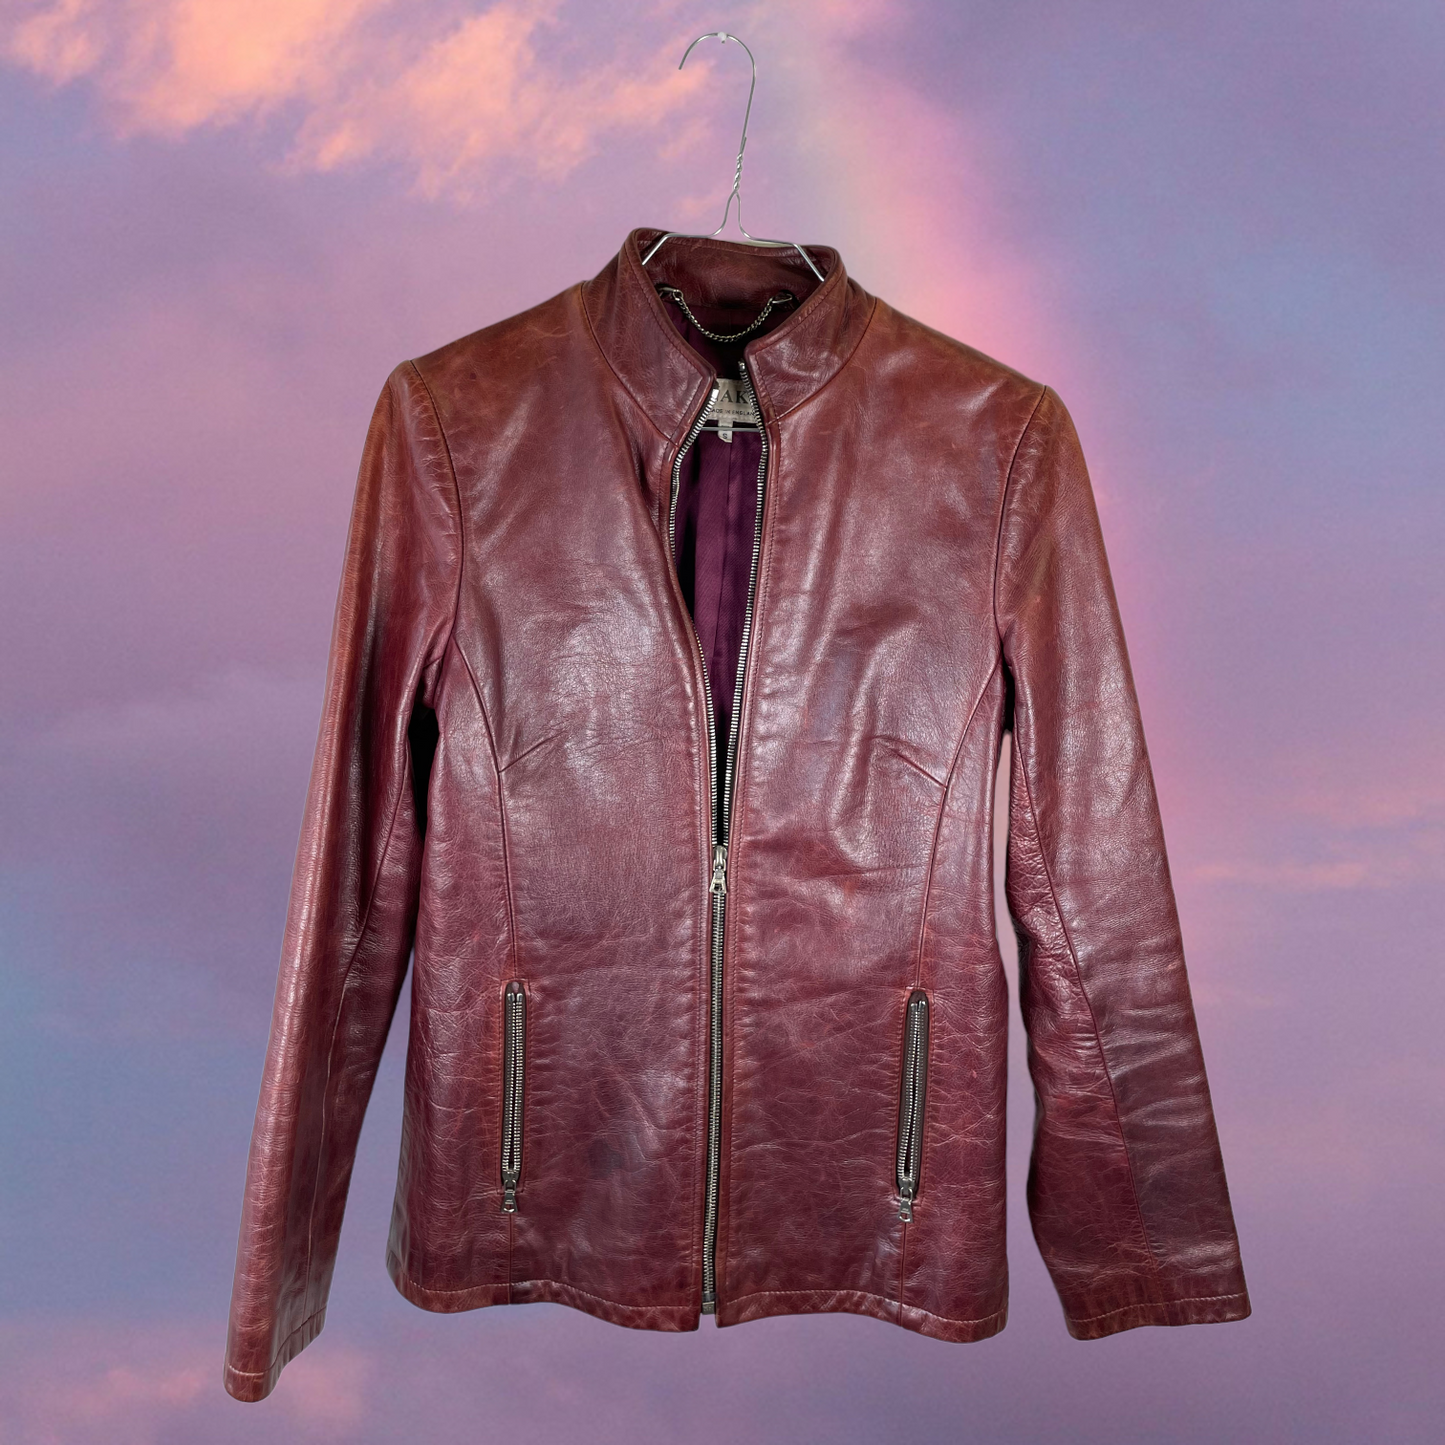 Vintage 2000 Classic Dark Red Leather Jacket with Zipper (S)